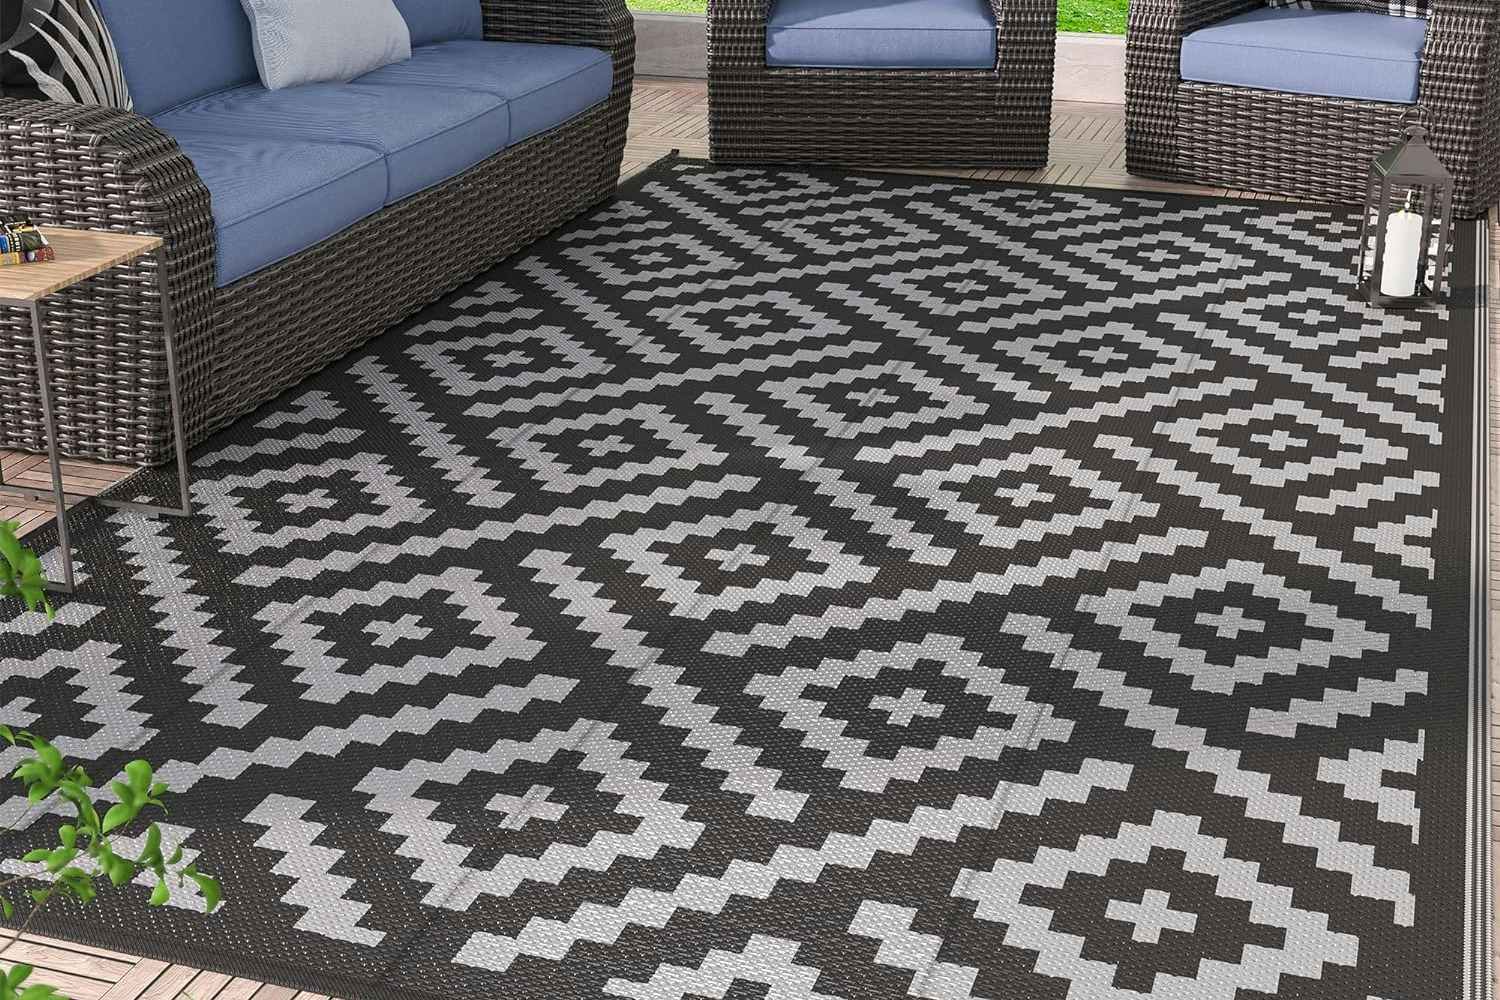 5' x 8' Outdoor Patio Rugs, as Low as $19.79 on Amazon